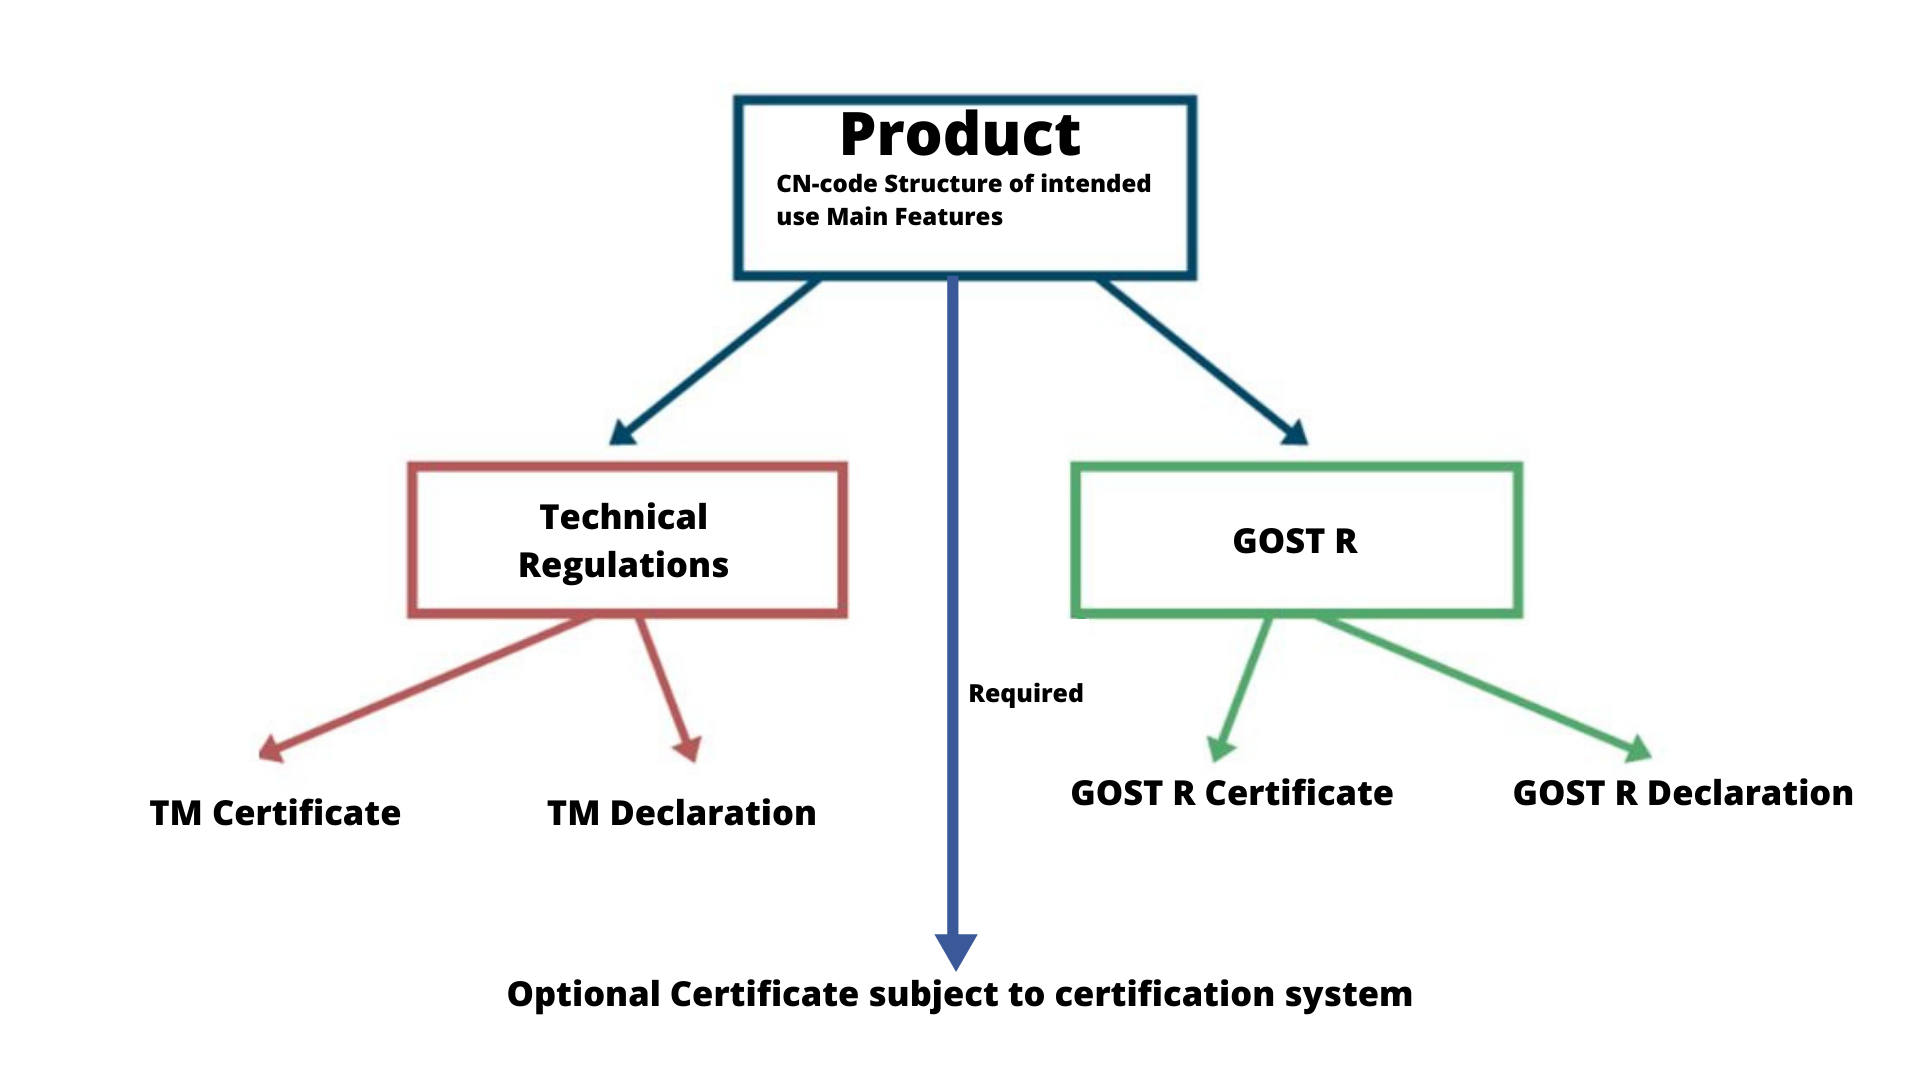 Certification requirements